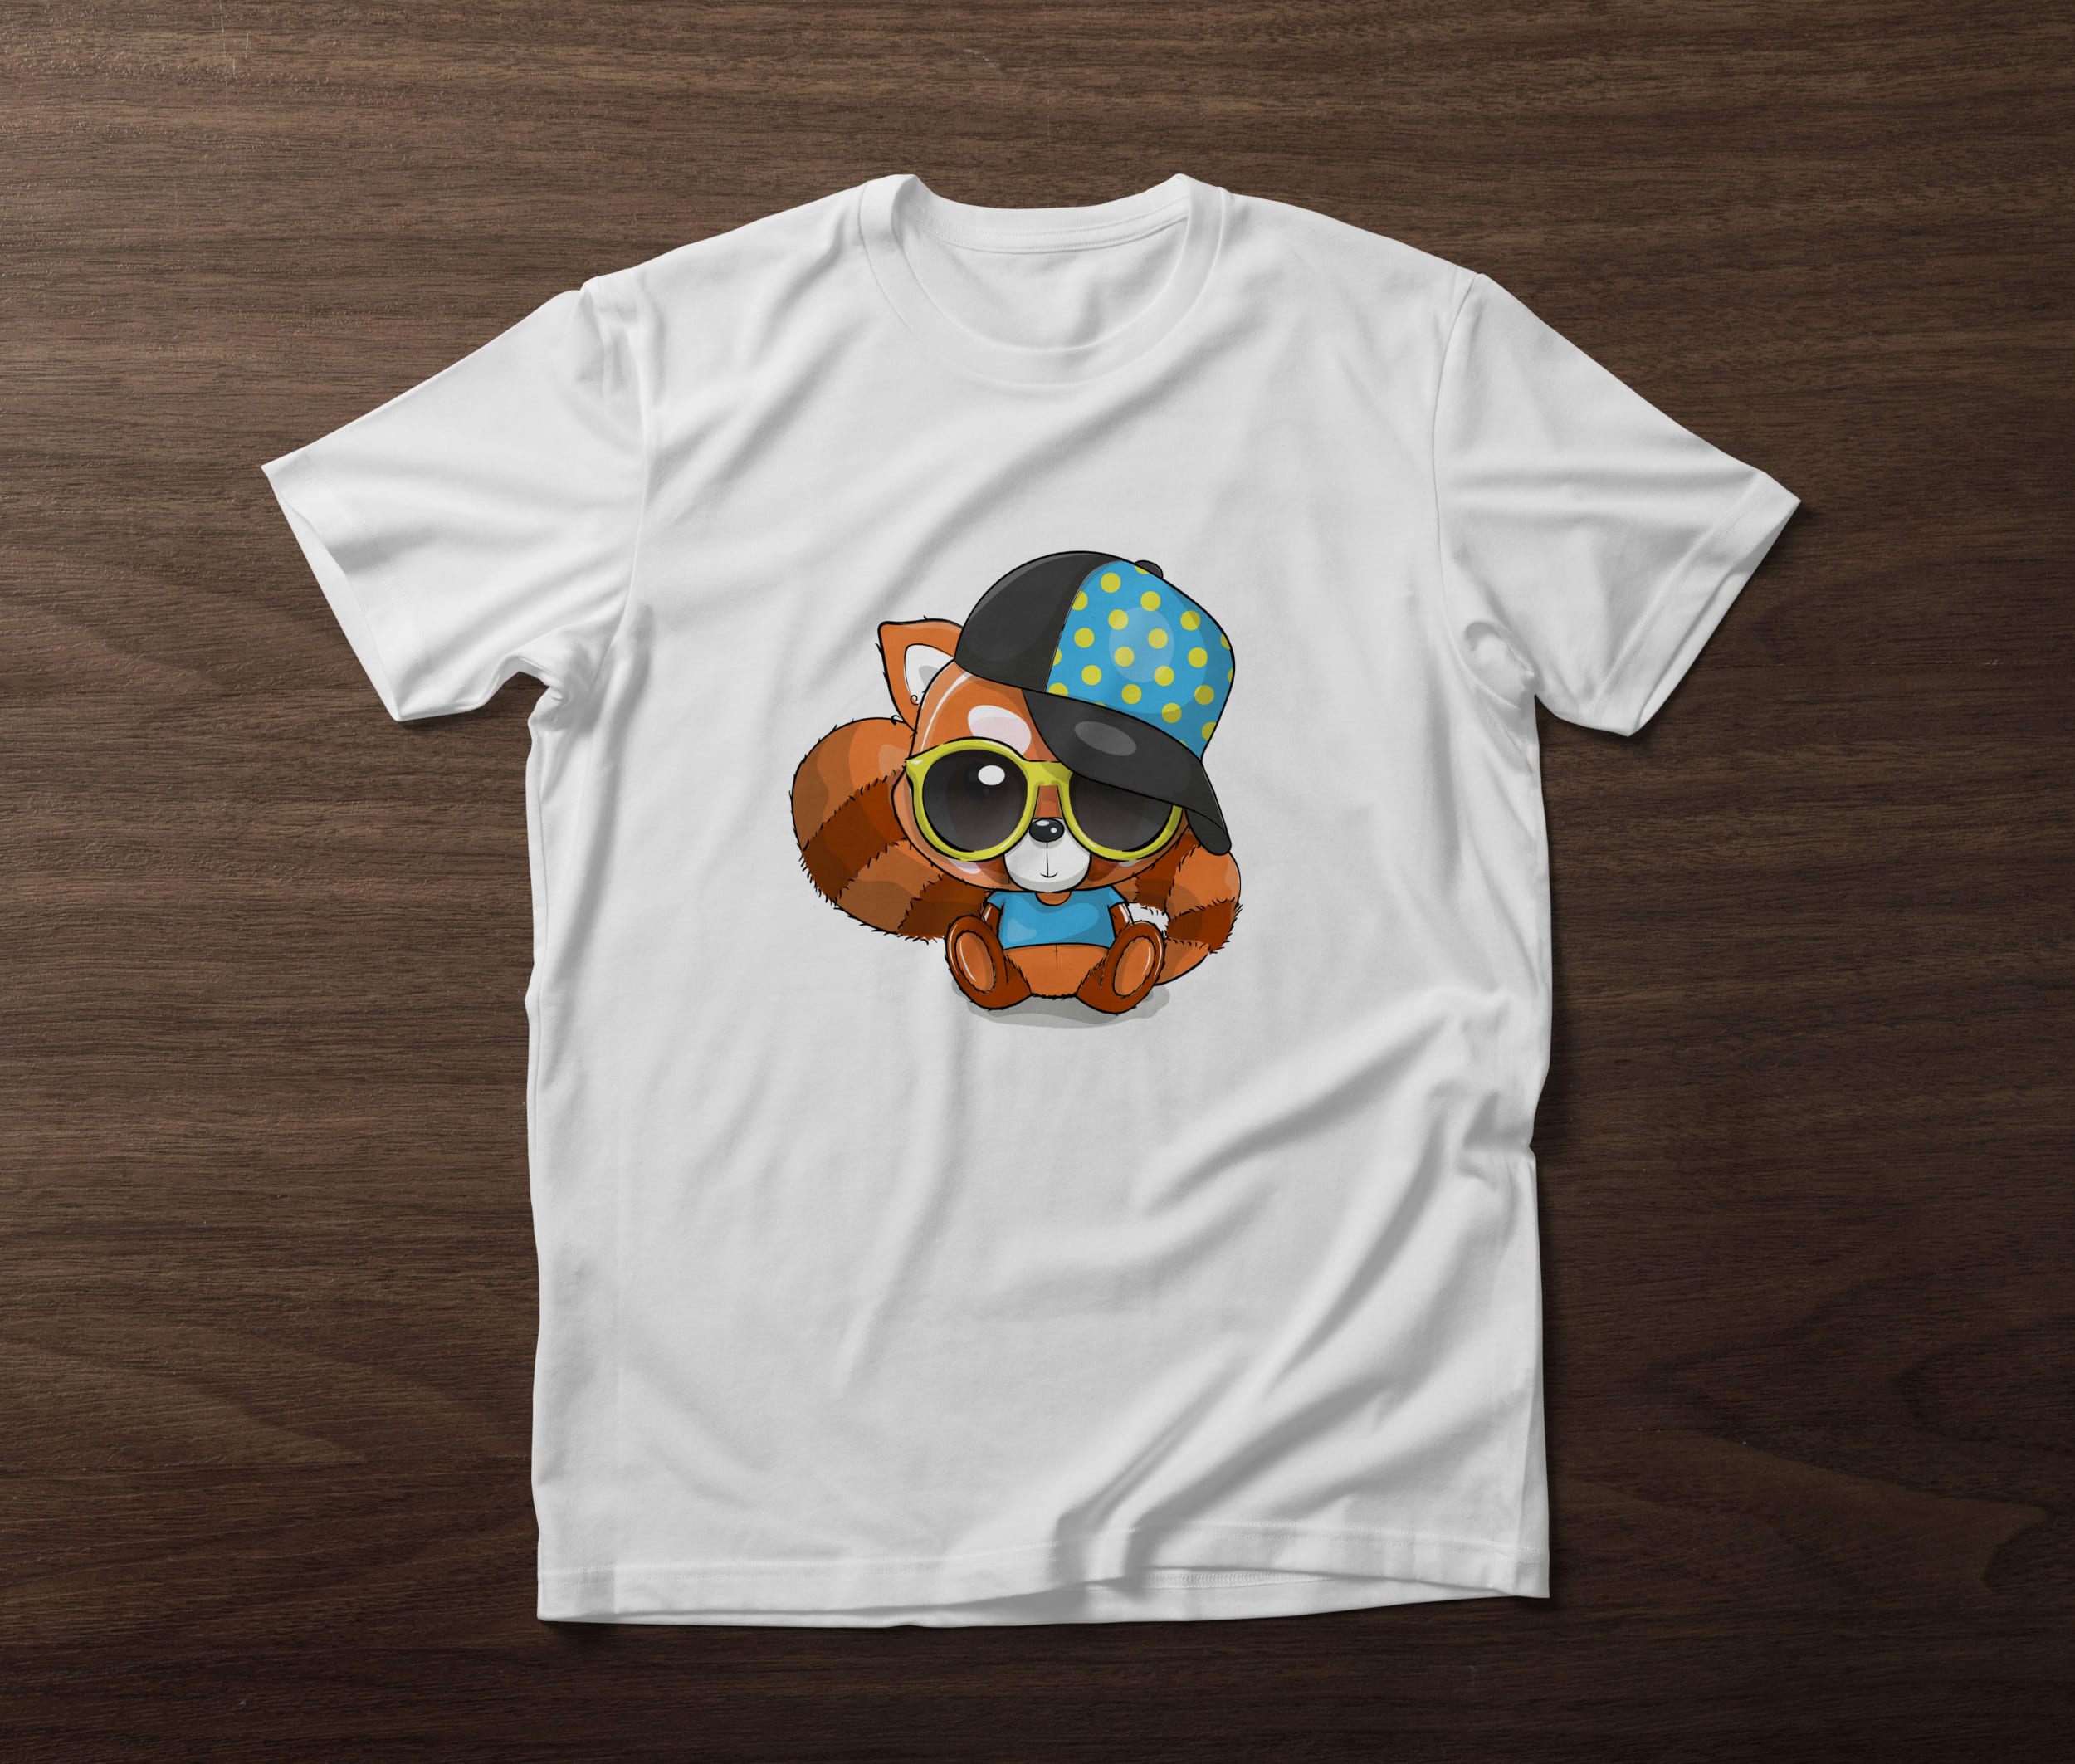 White t-shirt with a red panda in a cap and glasses on a wooden background.